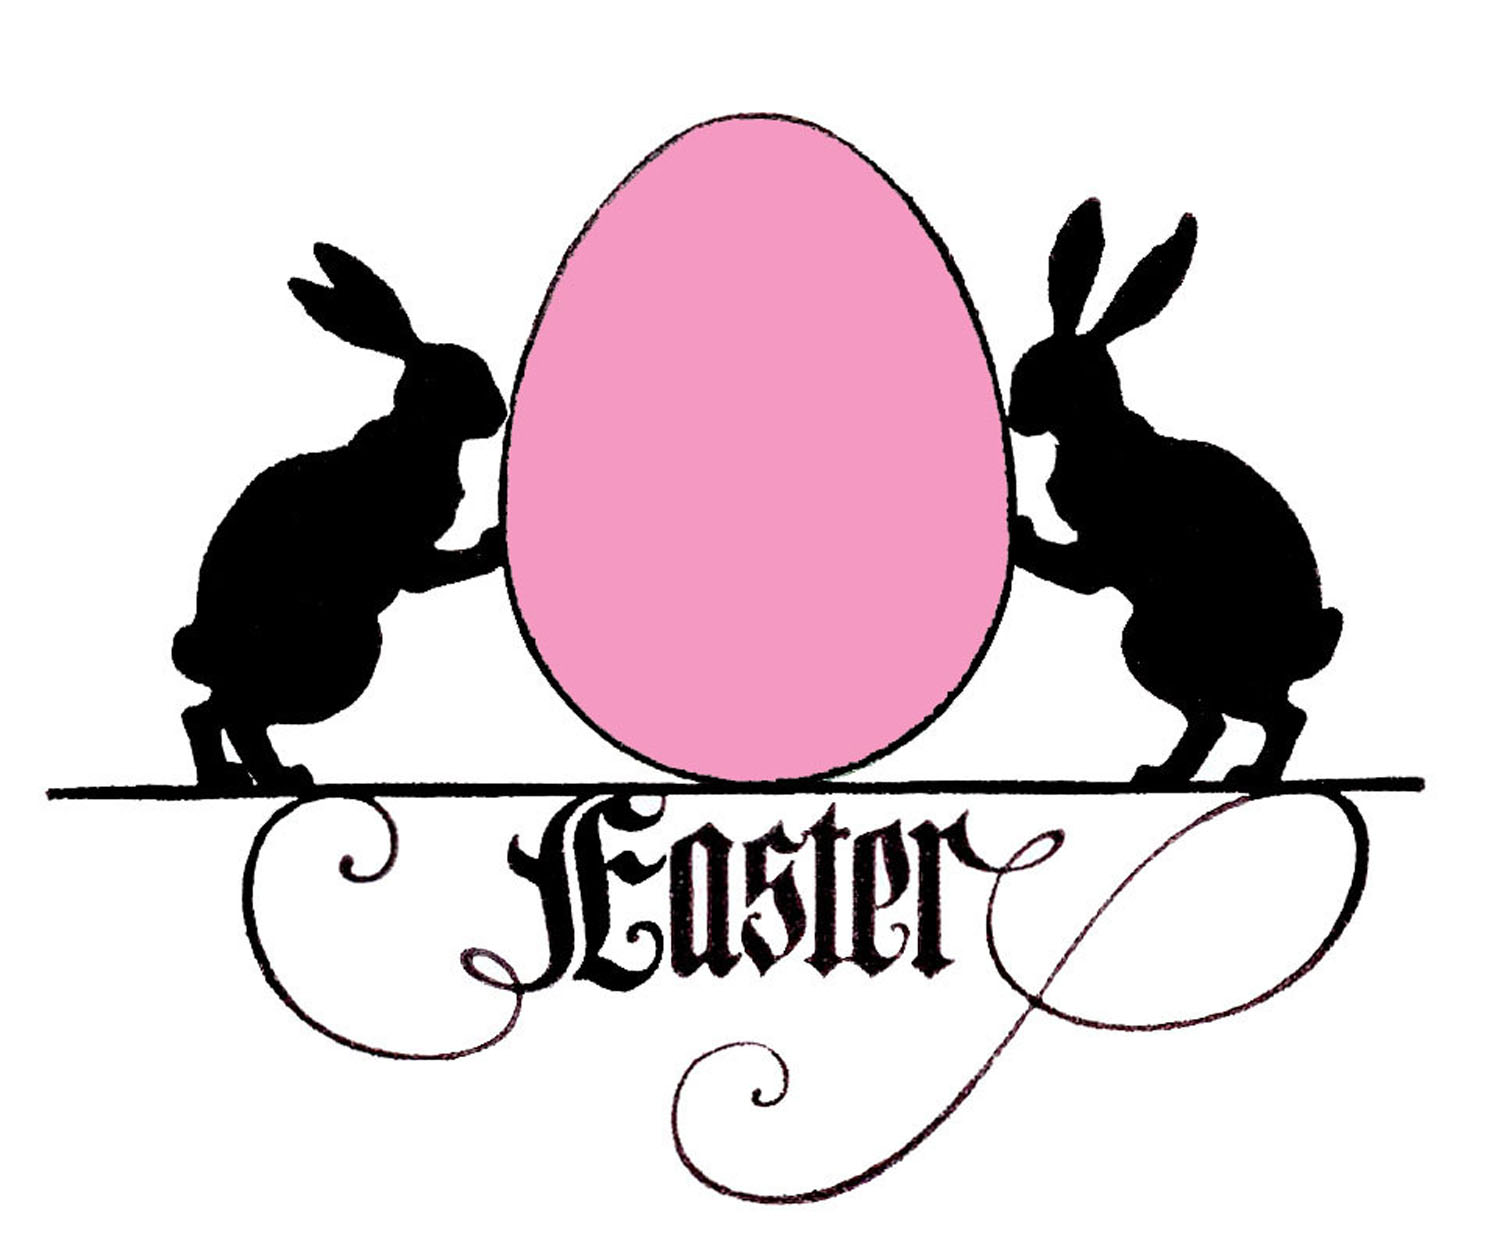 Here we have two cute Easter Bunny Silhouettes, holding a giant Egg! I love the swirly Easter font underneath!